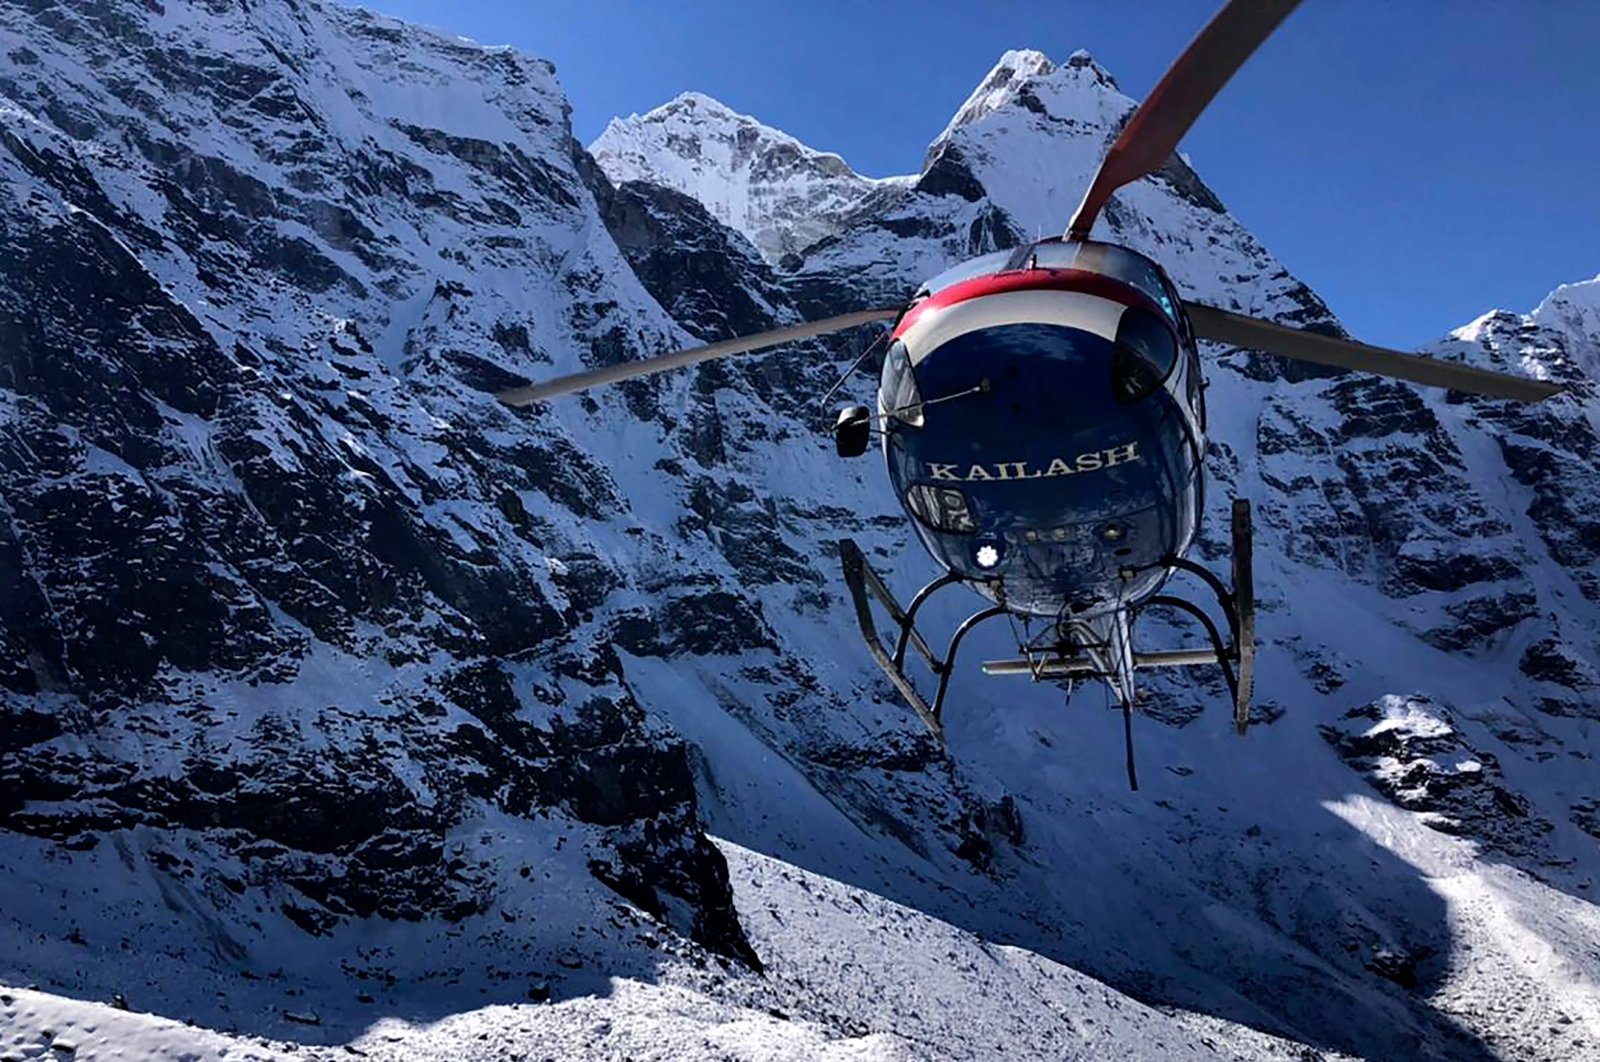 A rescue helicopter flies over the avalanche site on Mount Ama Dablam, in the Everest region, some 140 kilometers northeast of Kathmandu, Nepal, Nov. 1, 2021. (AFP Photo/Kailash Helicopter Services)